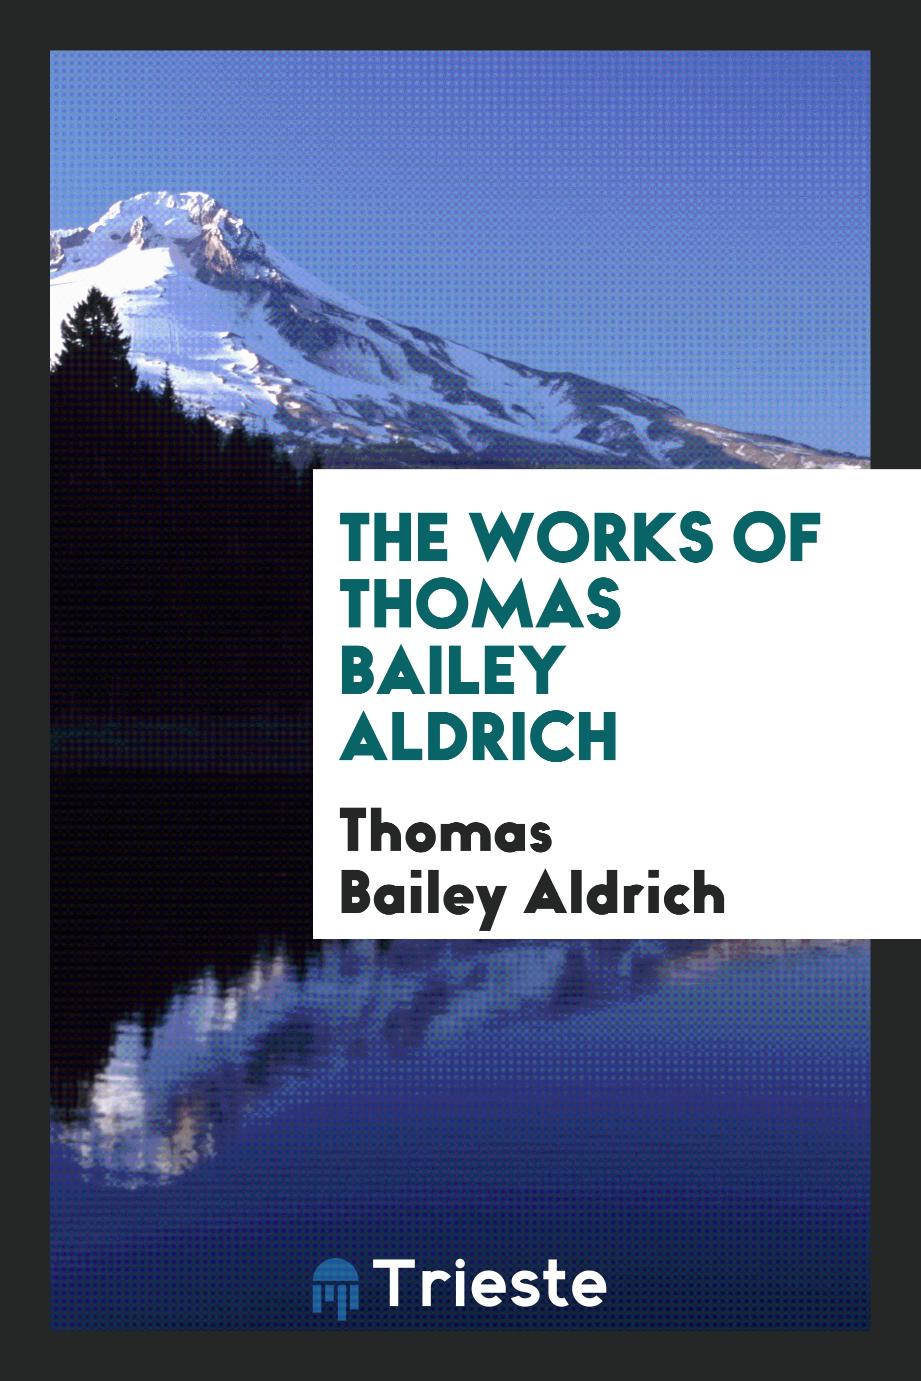 The works of Thomas Bailey Aldrich